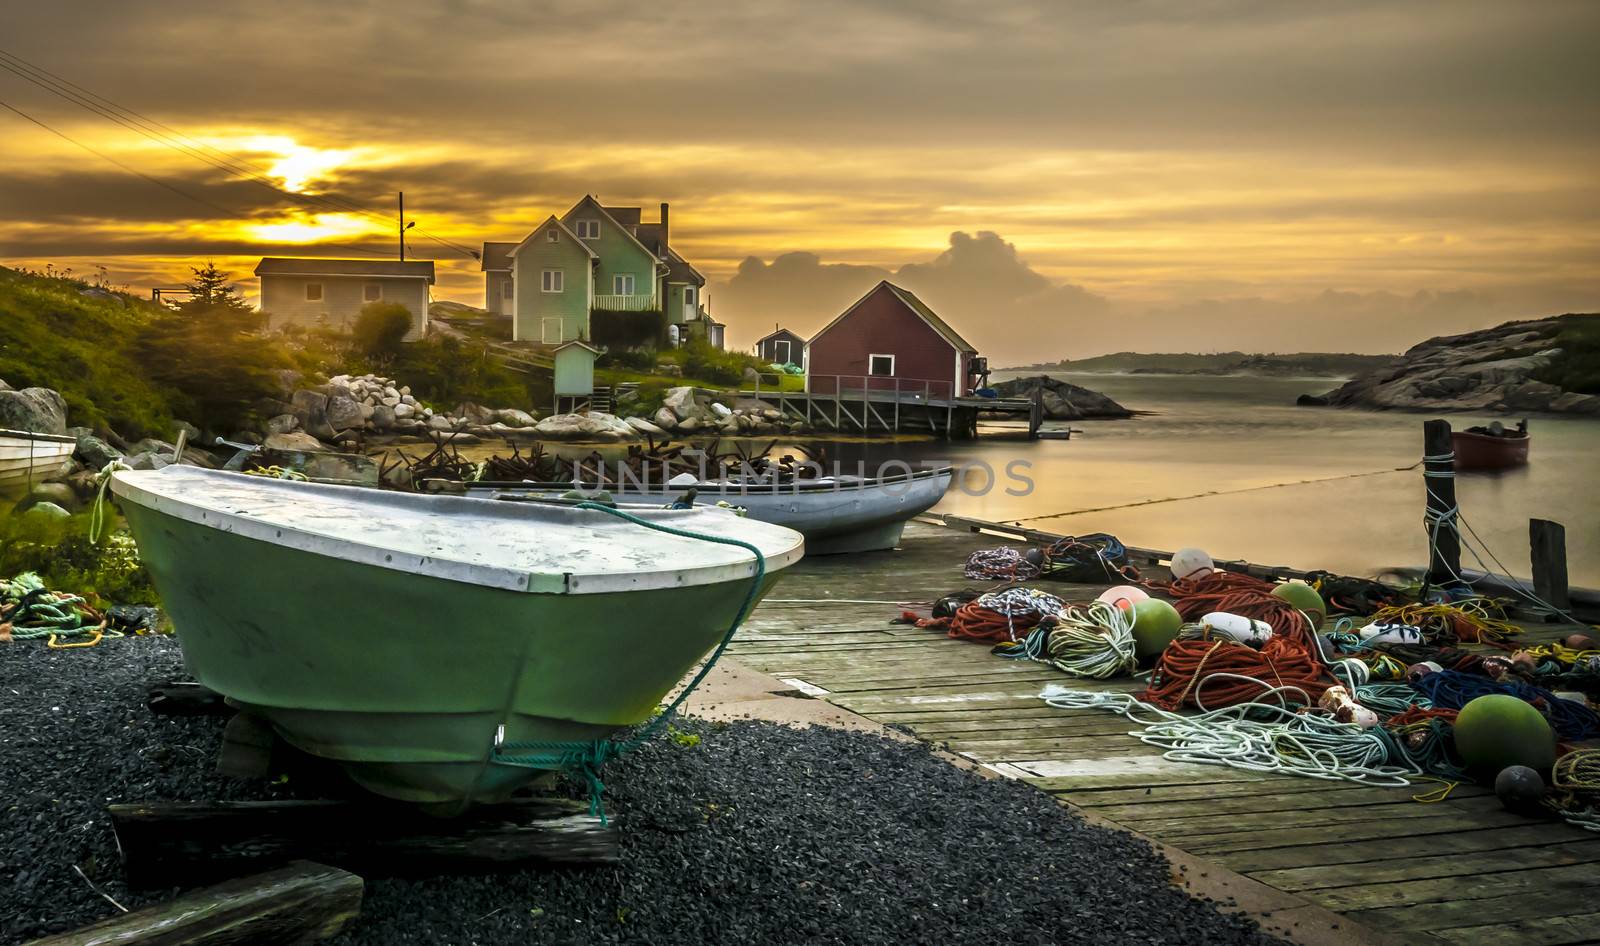 Peggy's Cove by vladikpod